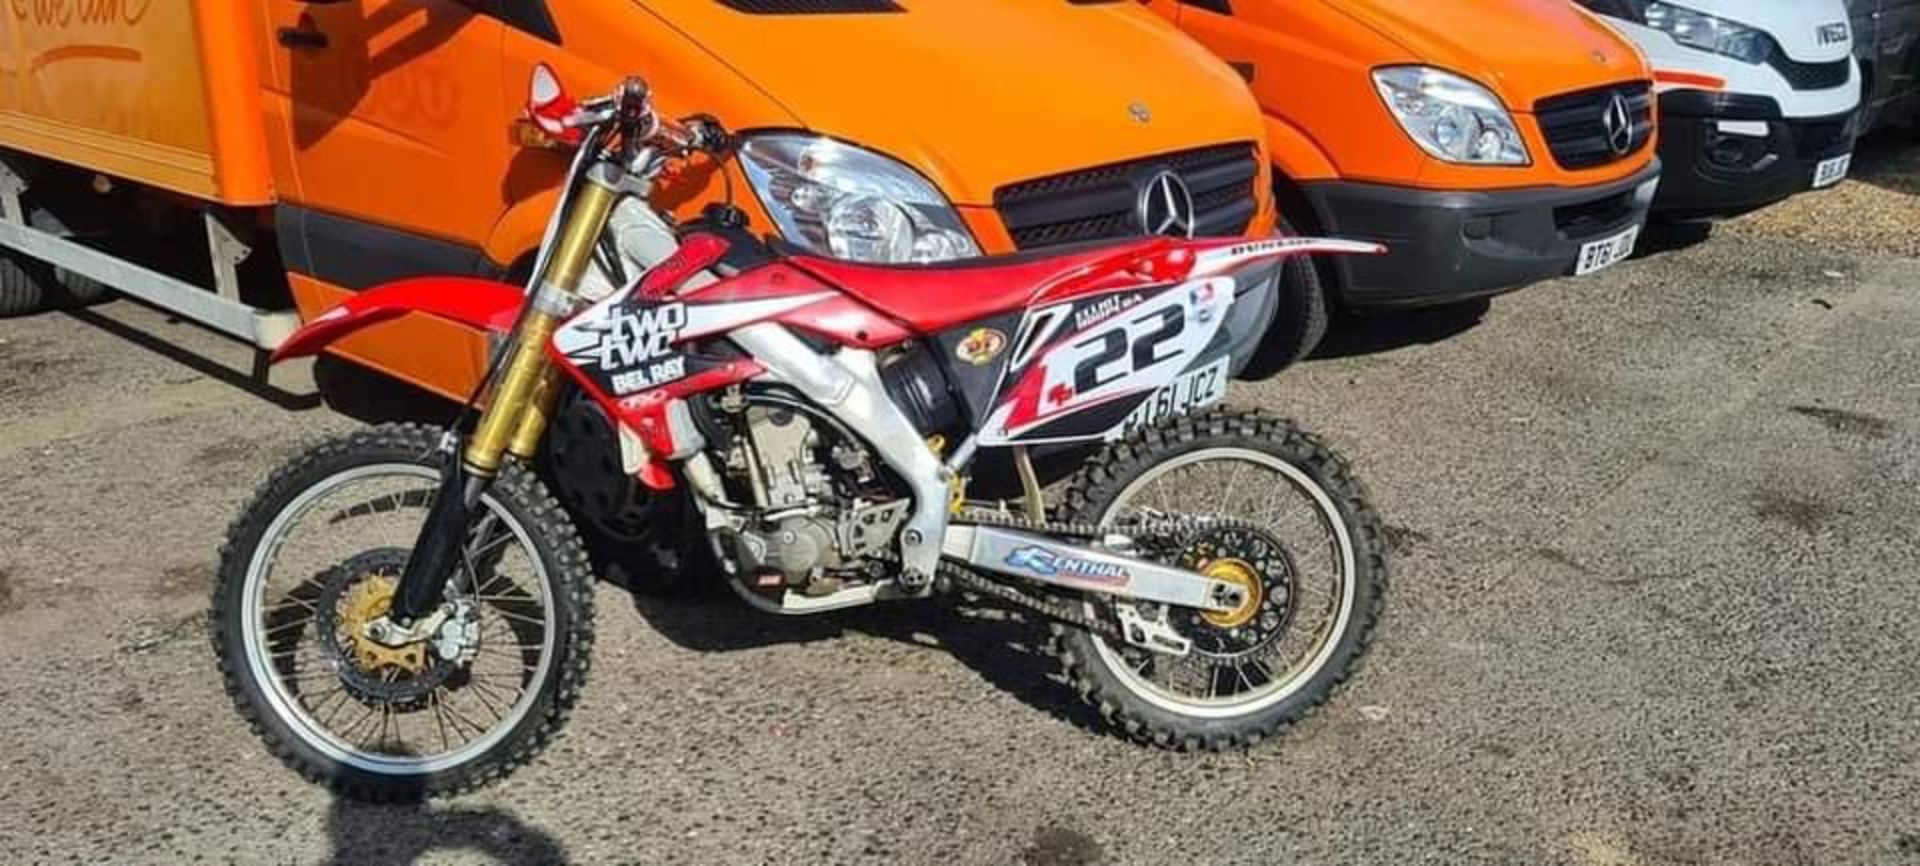 2007 HONDA CRF 250 TWIN PIPE MOTORCYCLE, VERY CLEAN LOOKED AFTER BIKE FOR ITS AGE *NO VAT* - Image 2 of 4